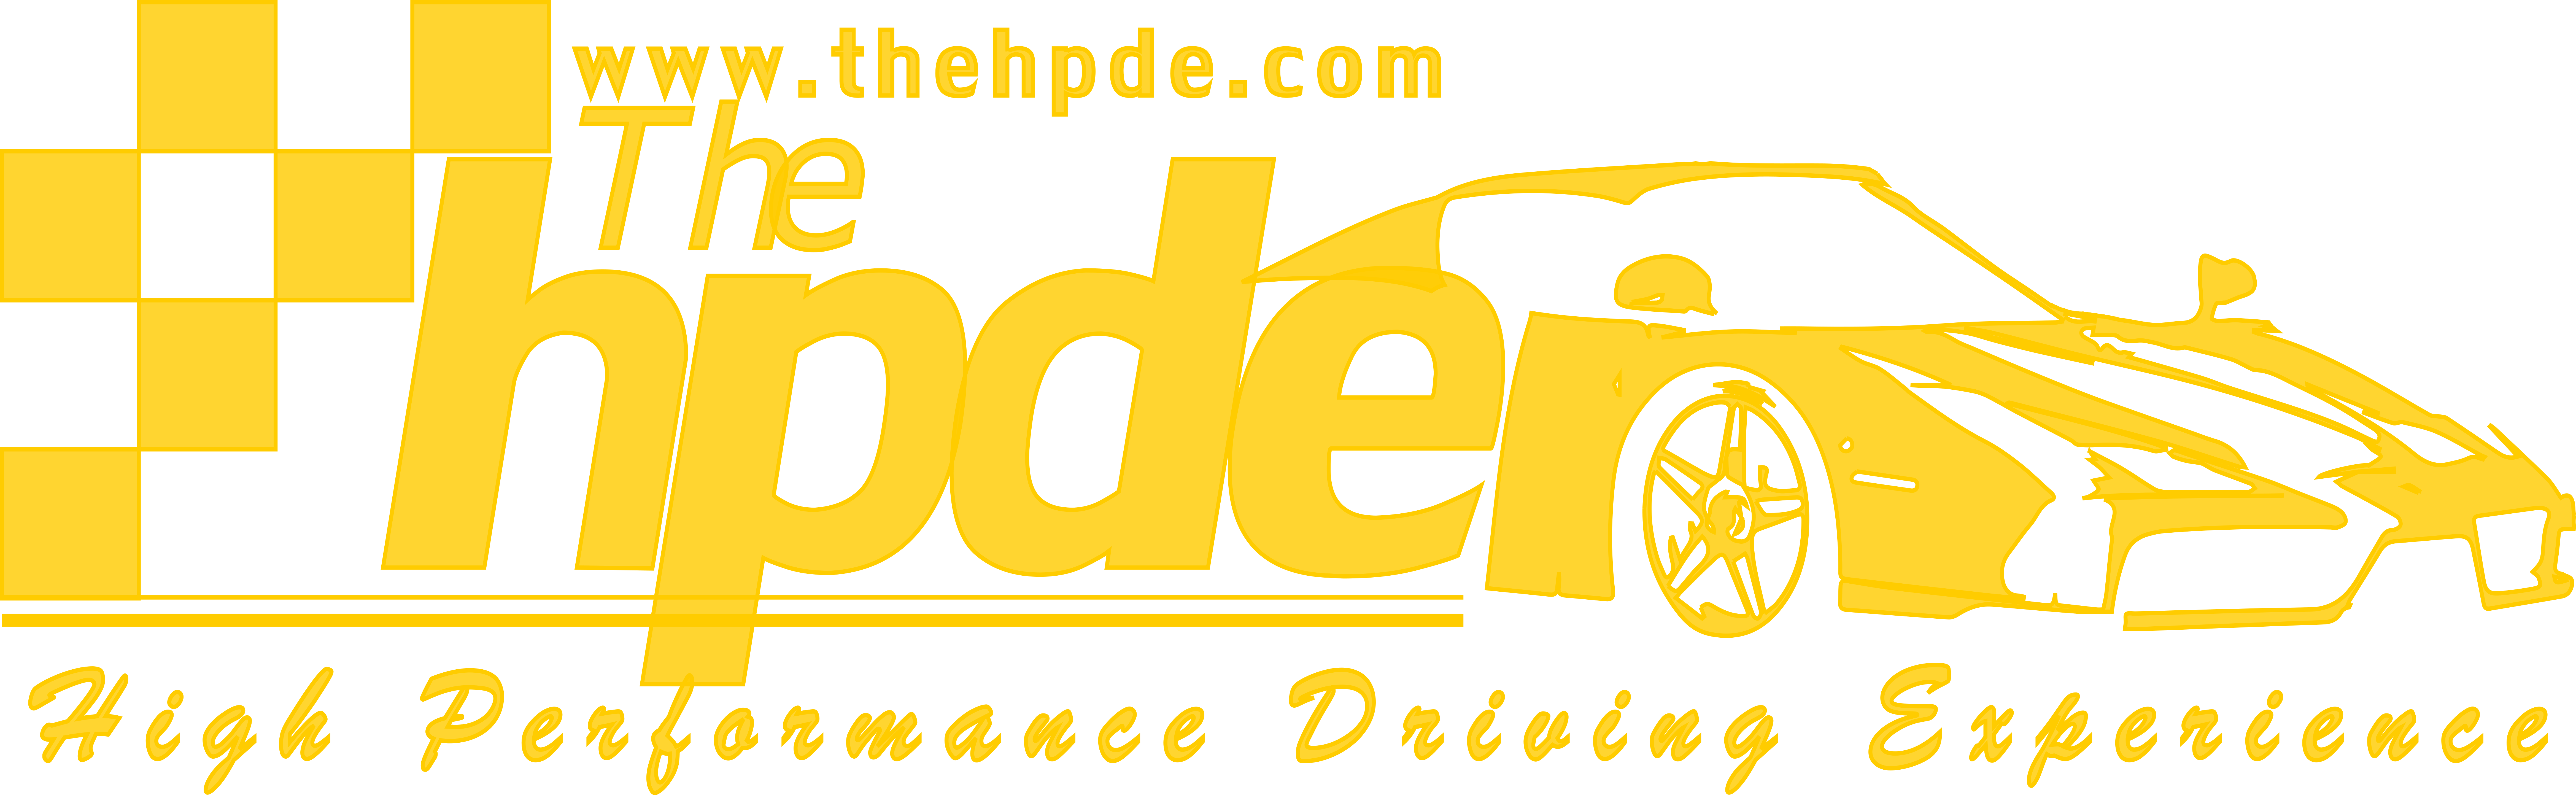 The HPDE